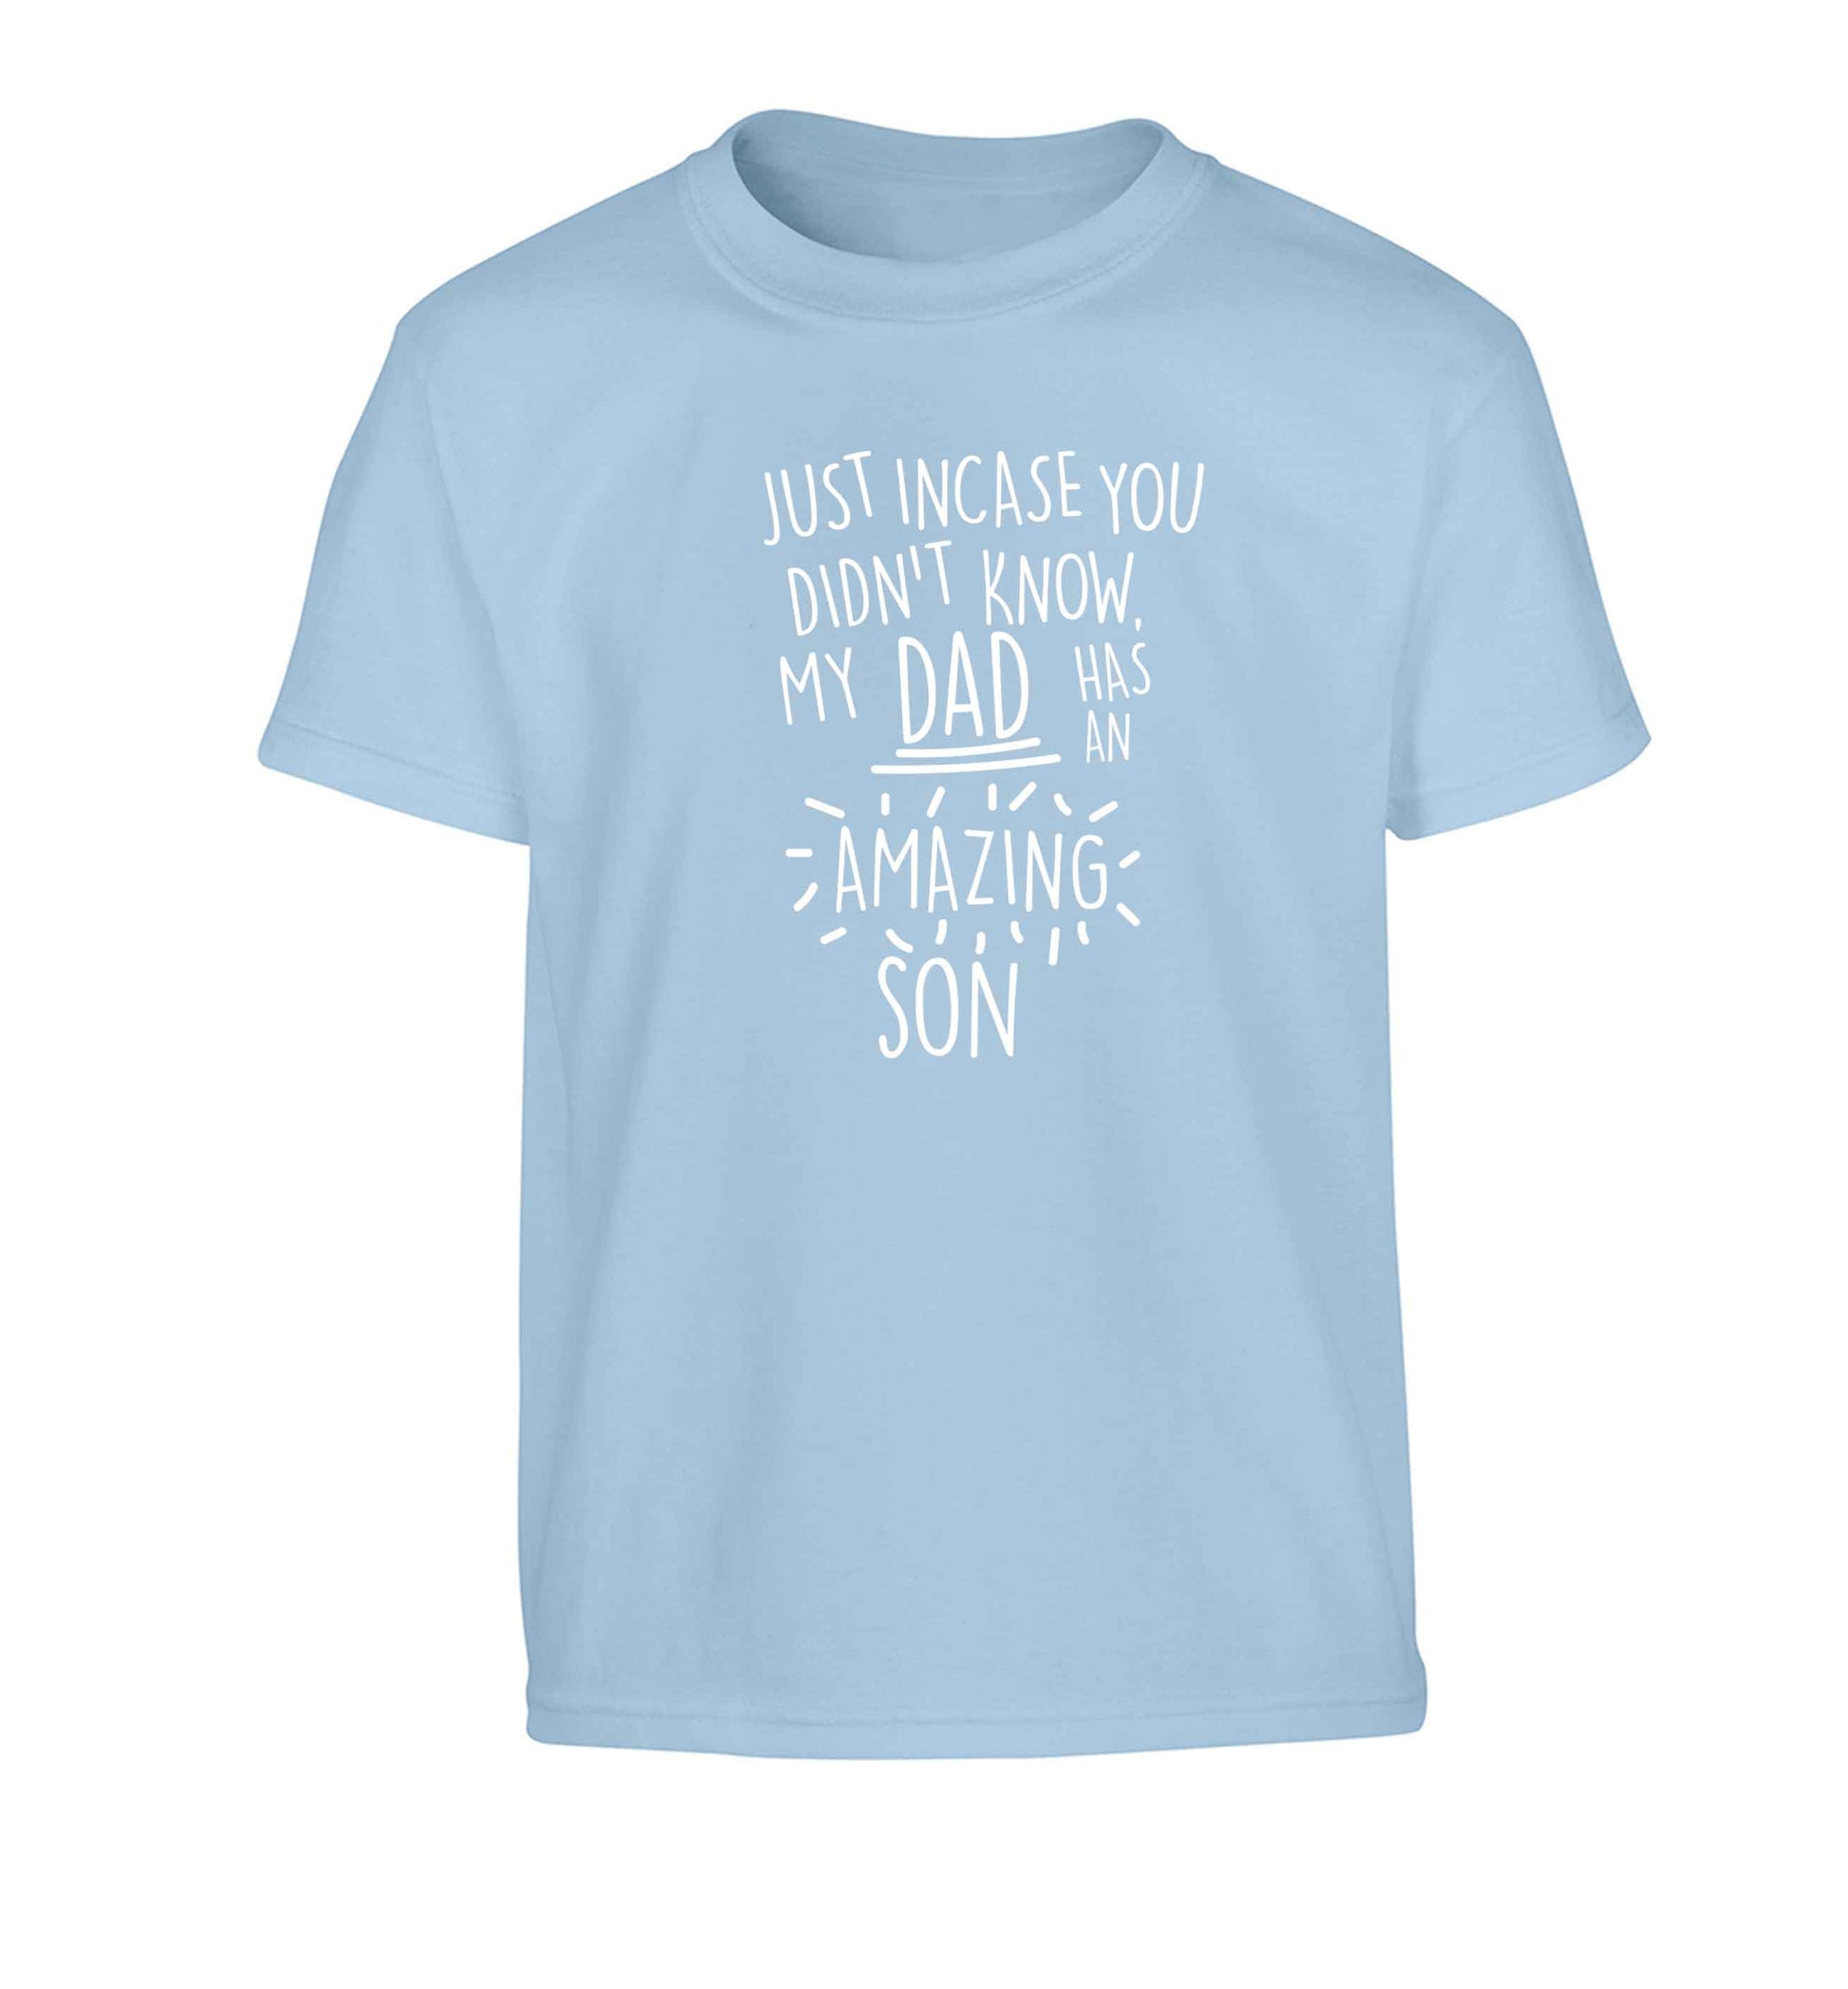 Just incase you didn't know my dad has an amazing son Children's light blue Tshirt 12-13 Years